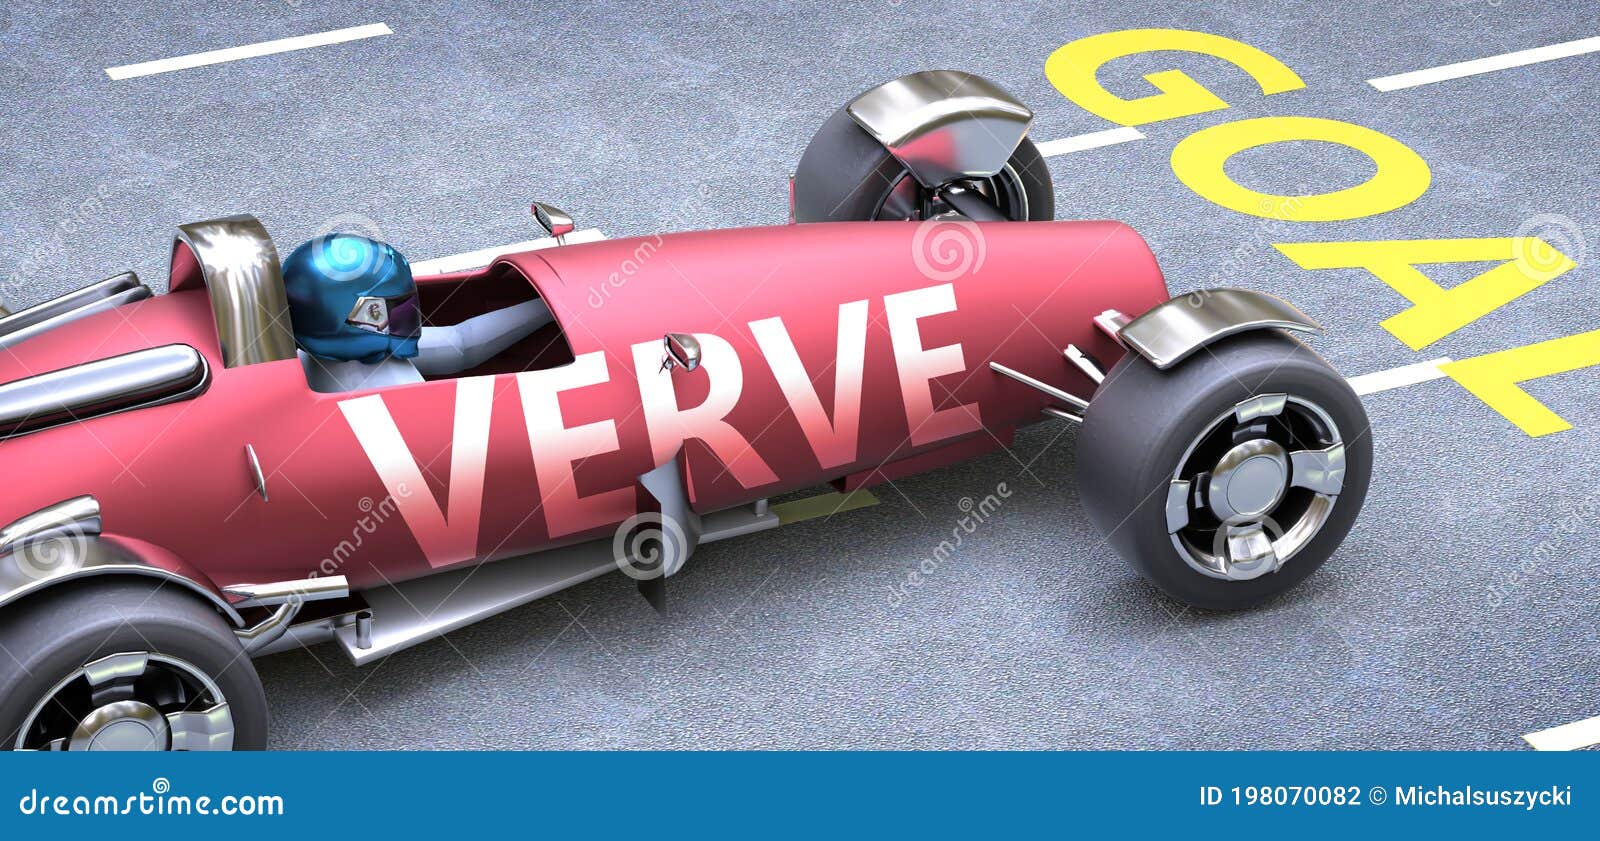 verve helps reaching goals, pictured as a race car with a phrase verve as a metaphor of verve playing important role in getting